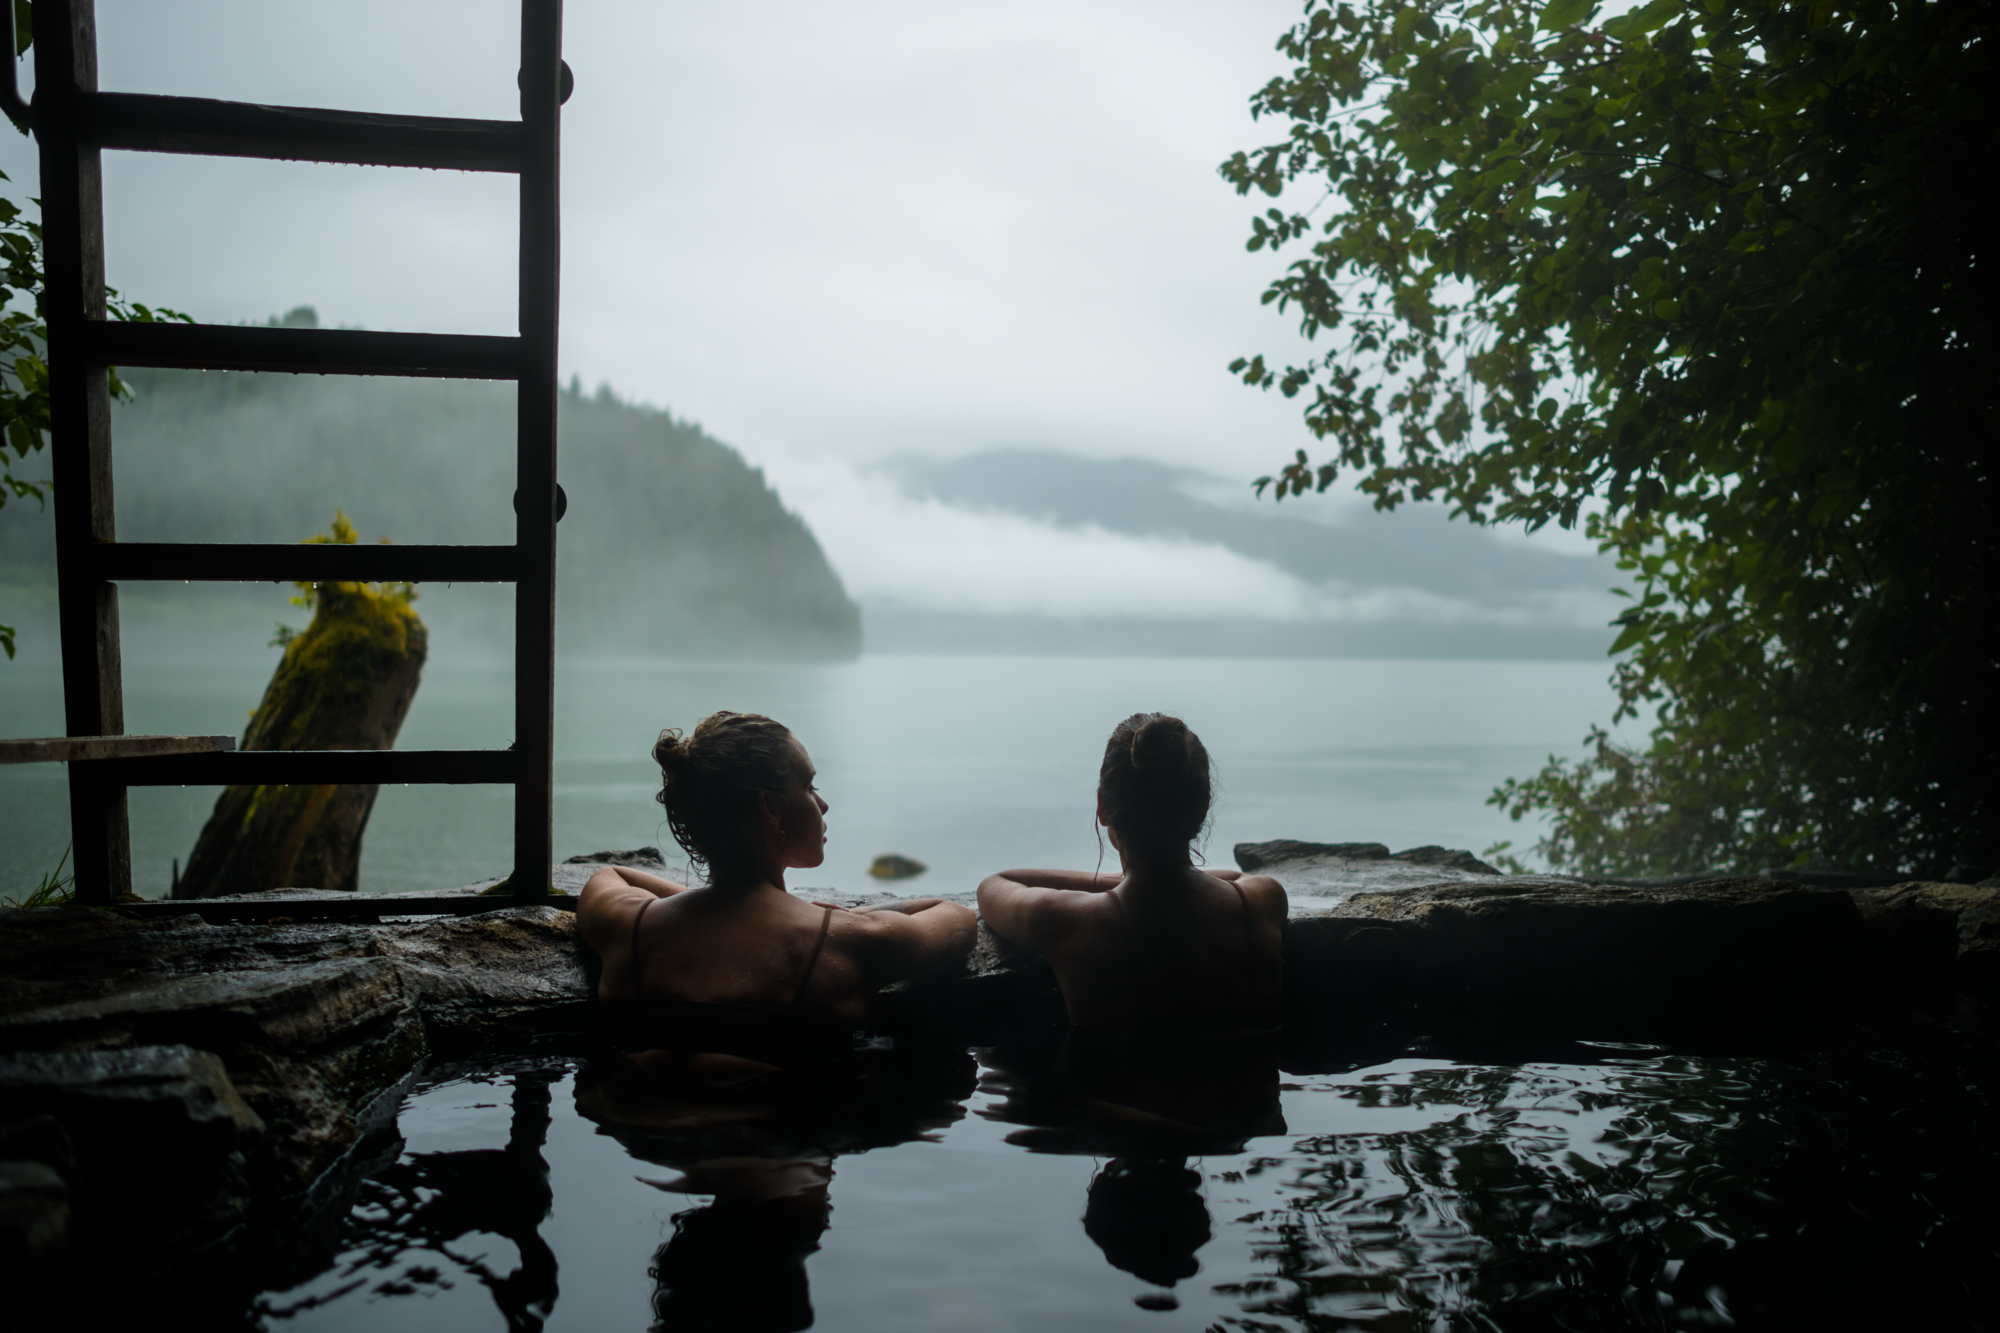 Two women look out from a hot spring over the ocean. It is dark and overcast.